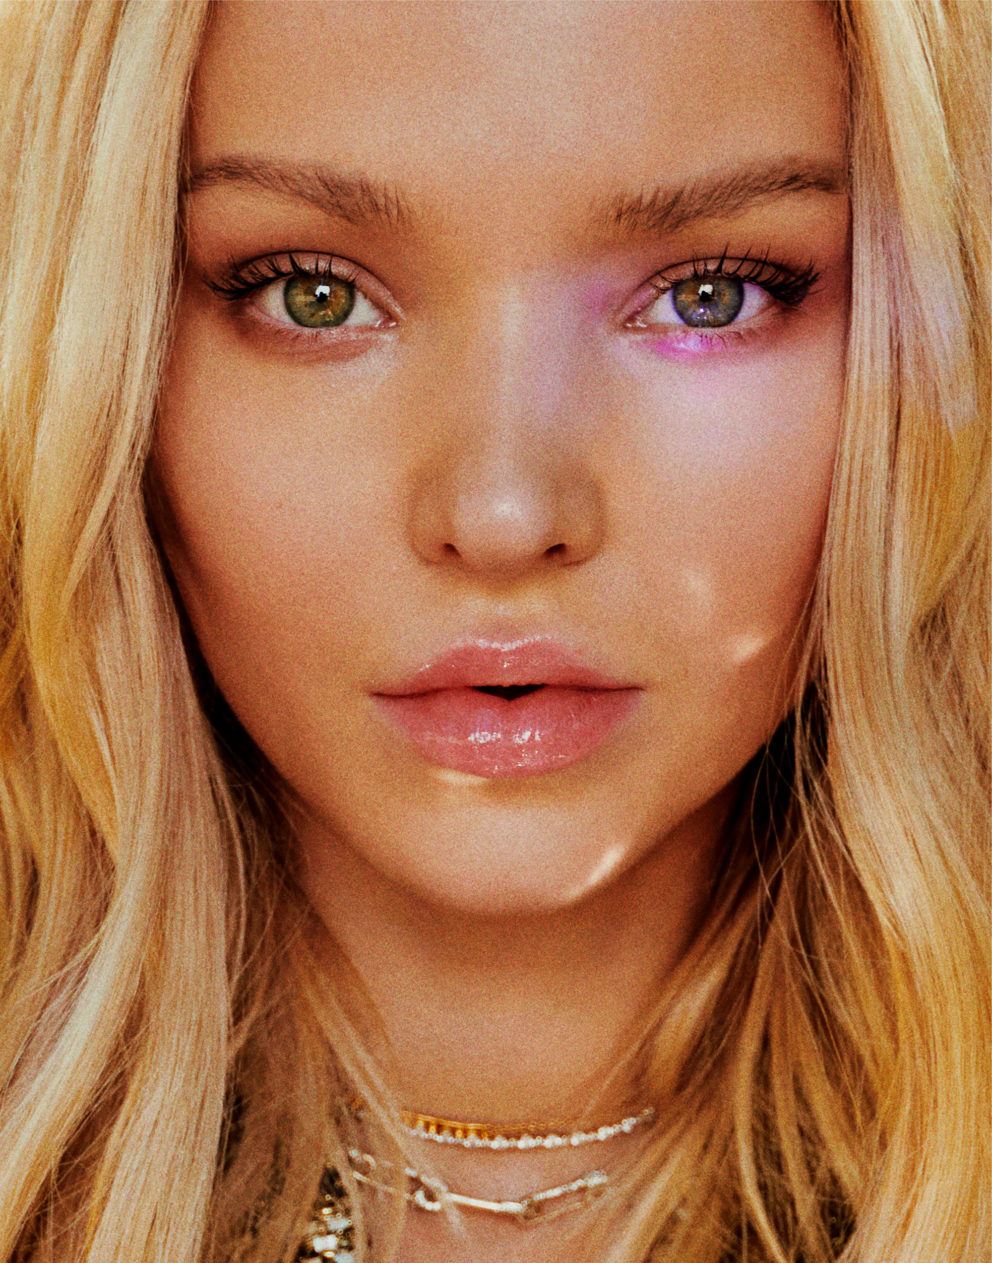 200622 0010 Sbjct Dove Cameron 147 Web By Christian Hogstedt